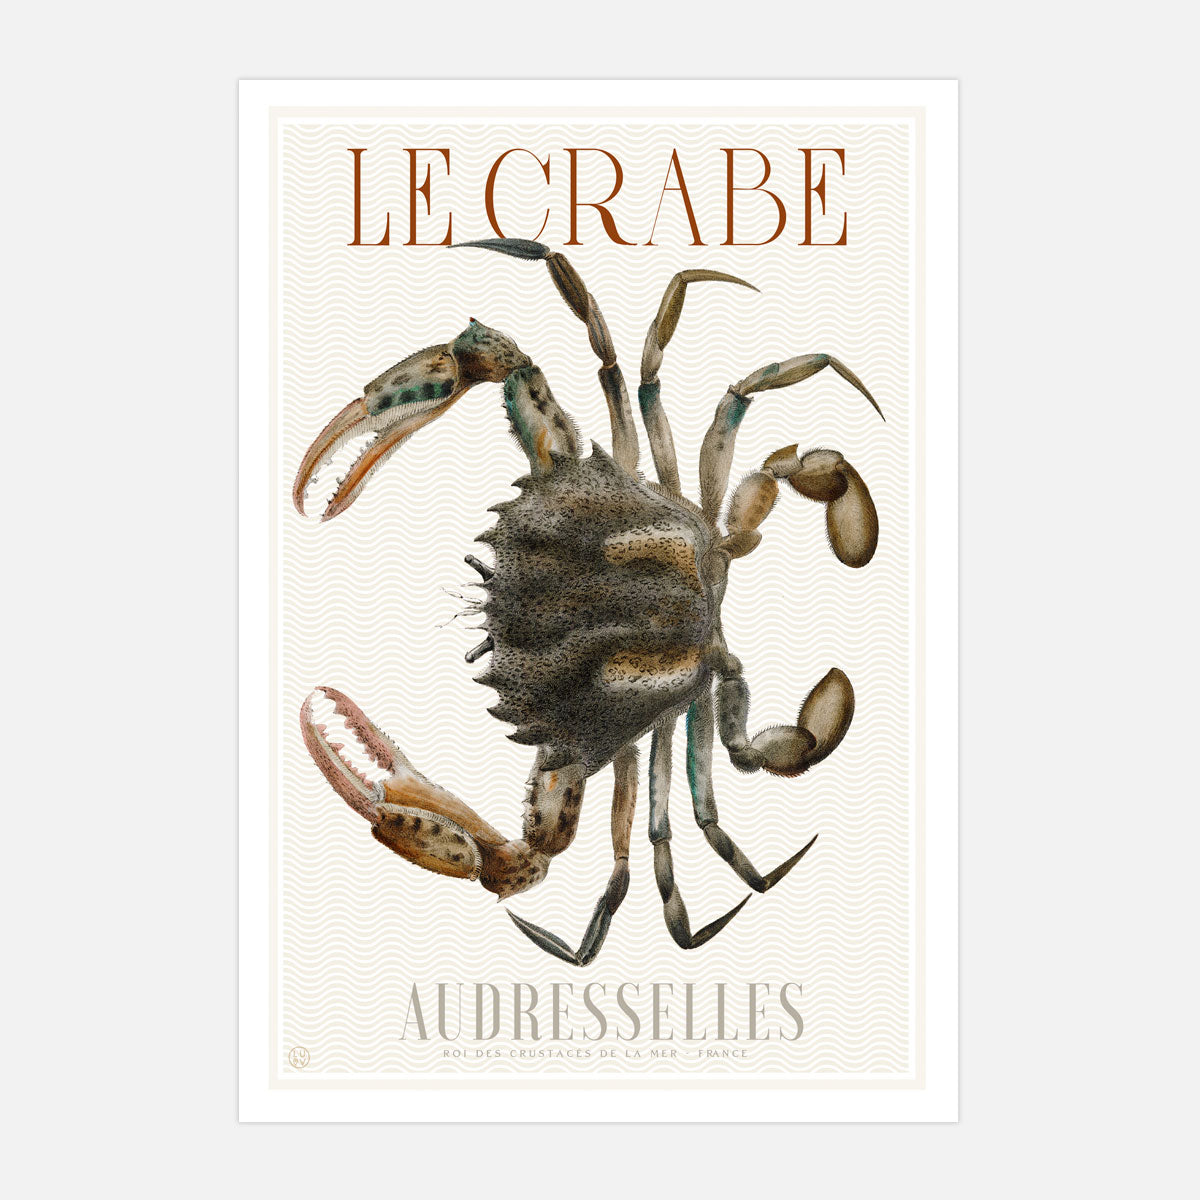 French Crab retro vintage poster from Places We Luv